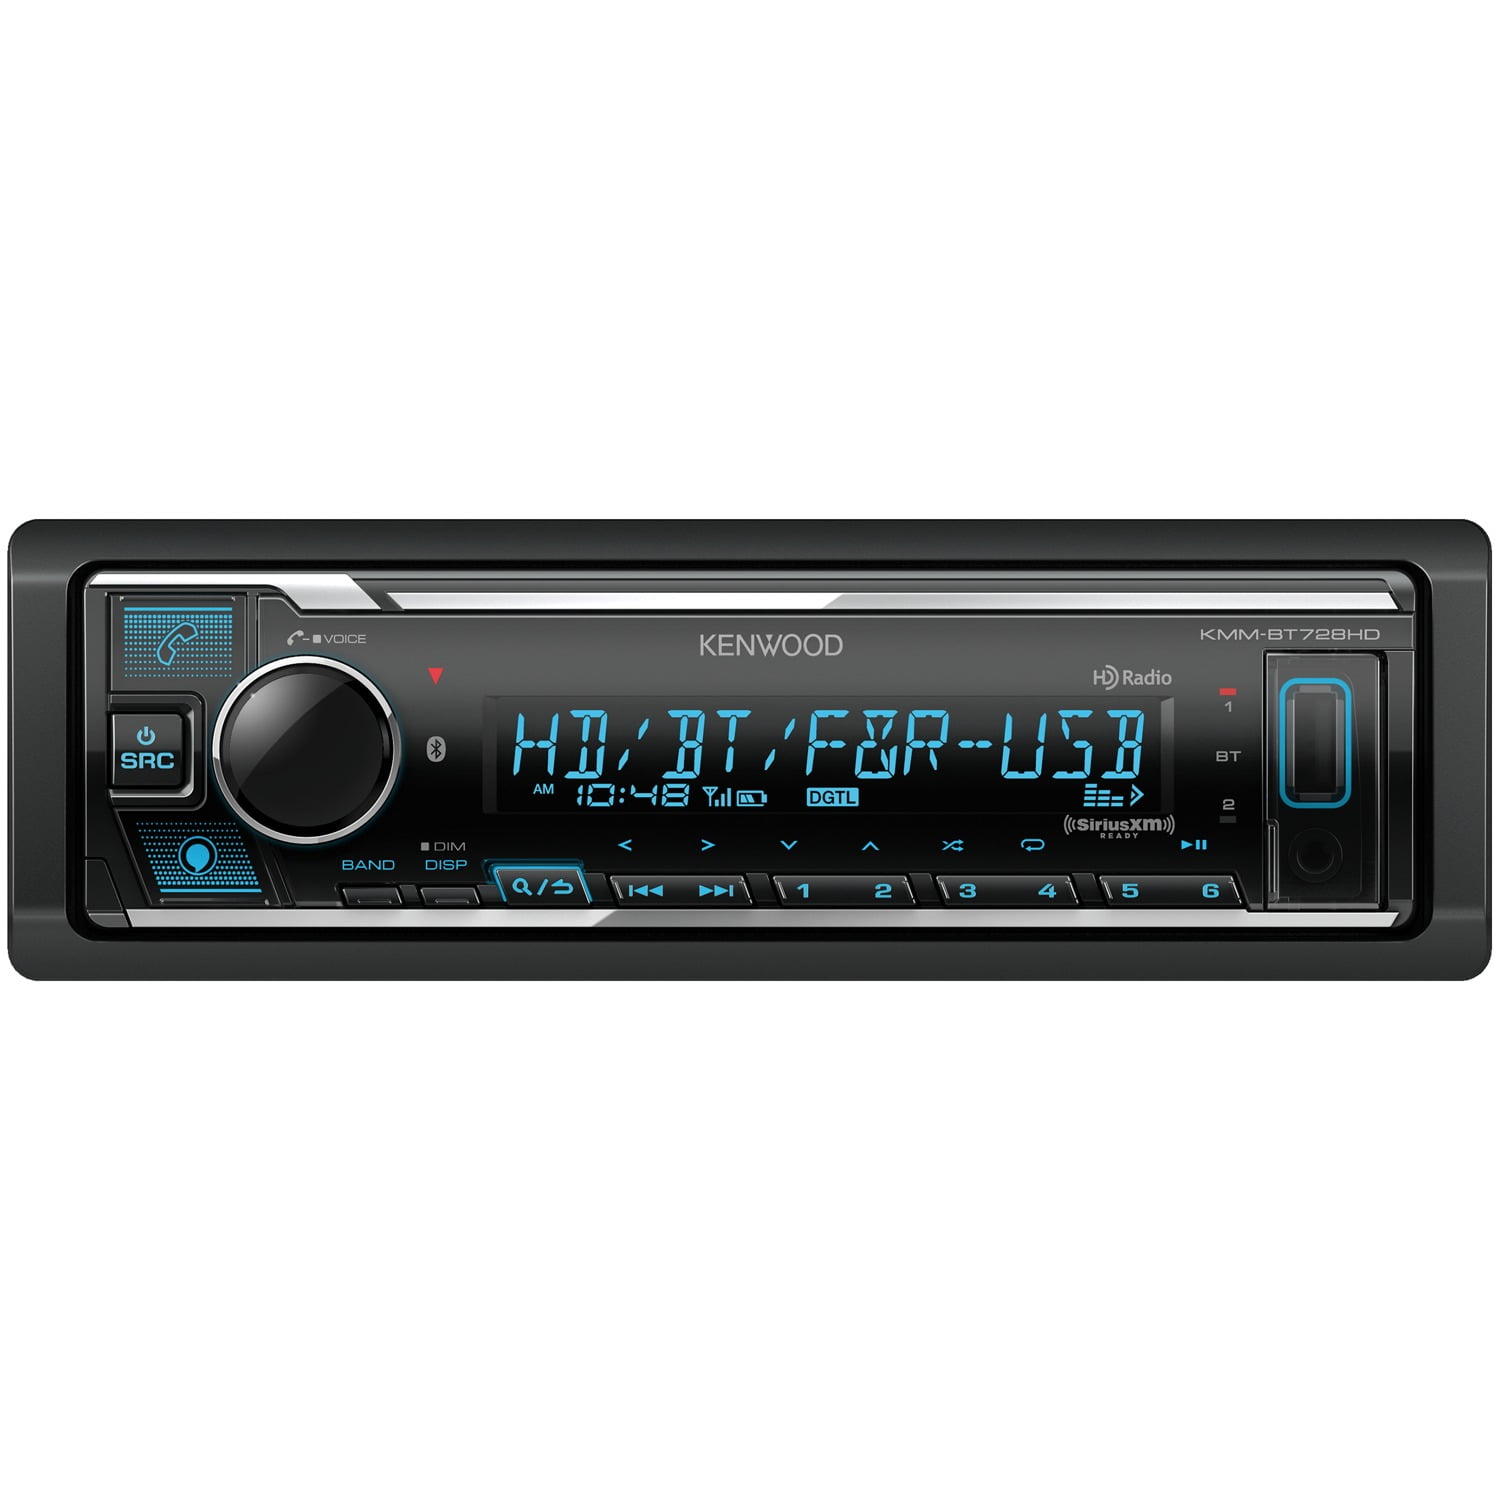 Kenwood KMM-BT728HD Single-Din In-Dash Media Receiver With Radio, Electronic Voice Assistant, And Siriusxm Ready -